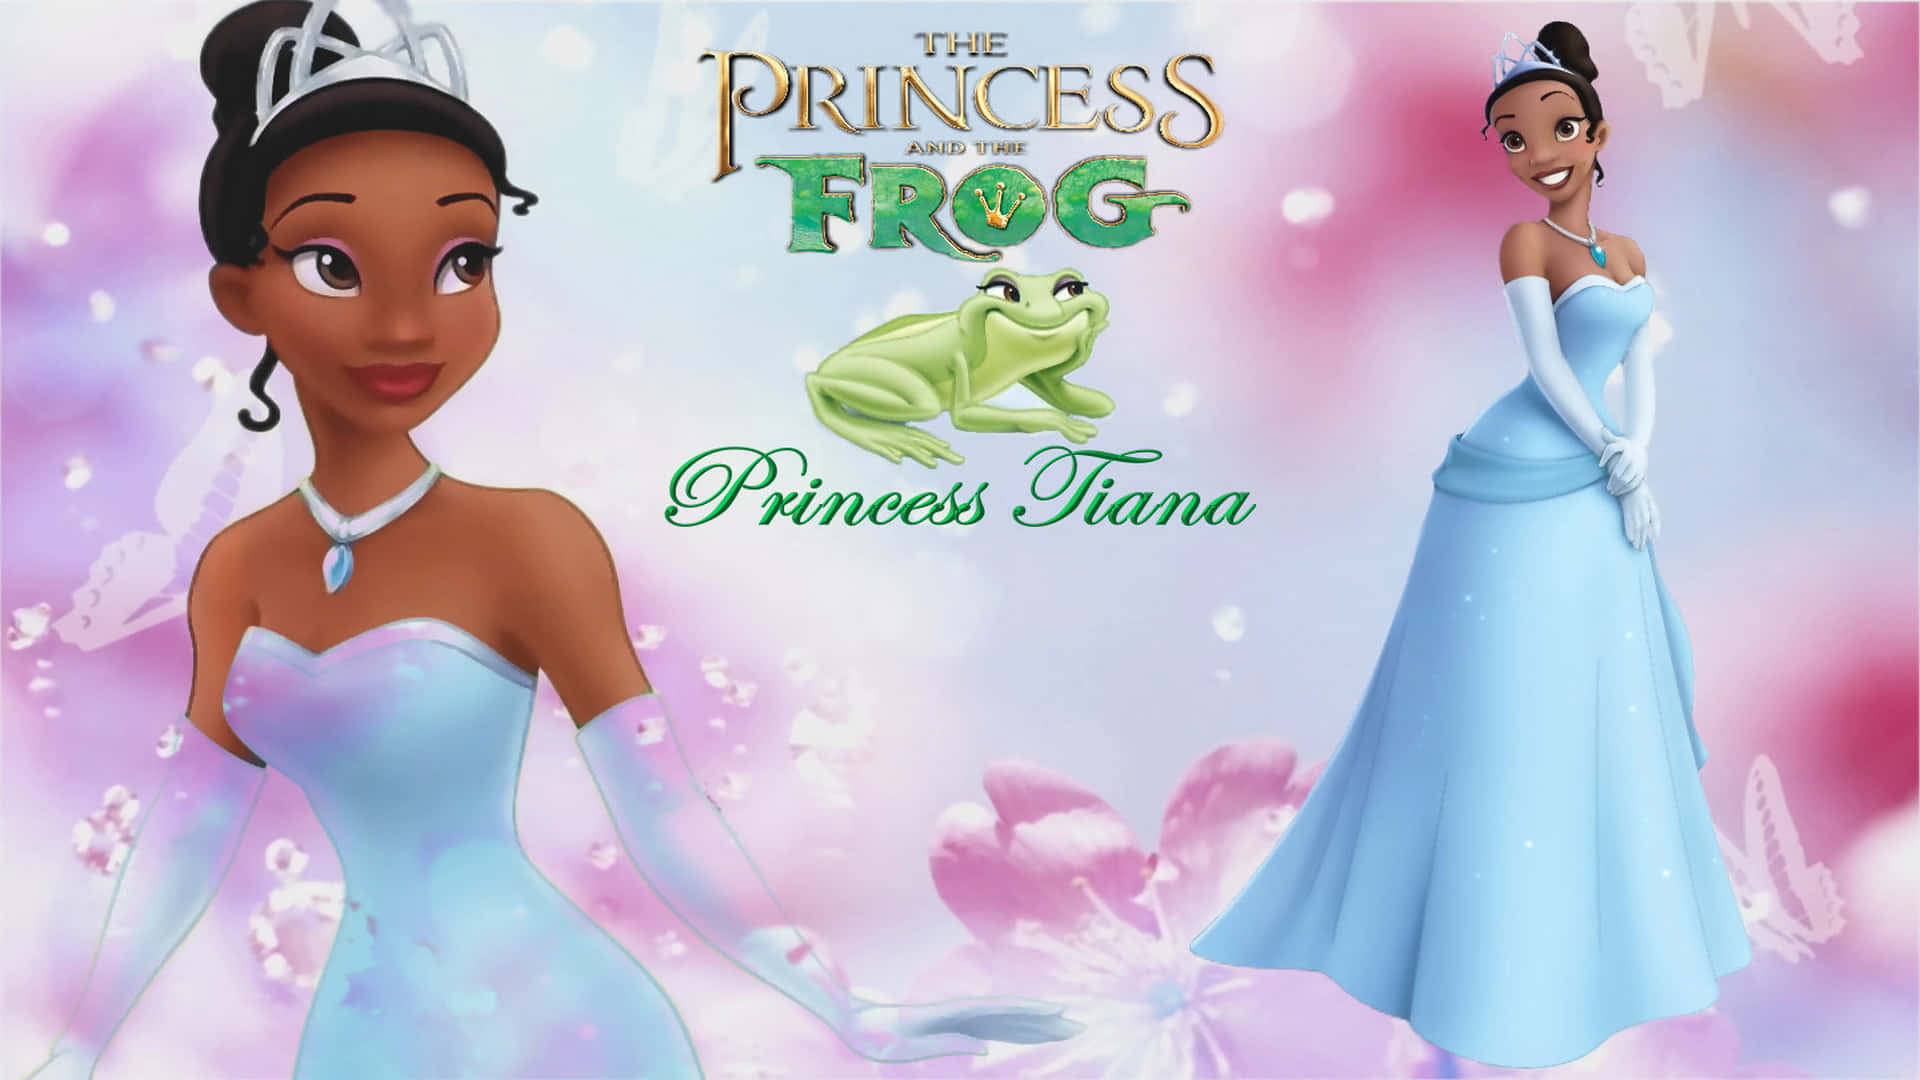 Princess Tiana and Prince Naveen in romantic embrace